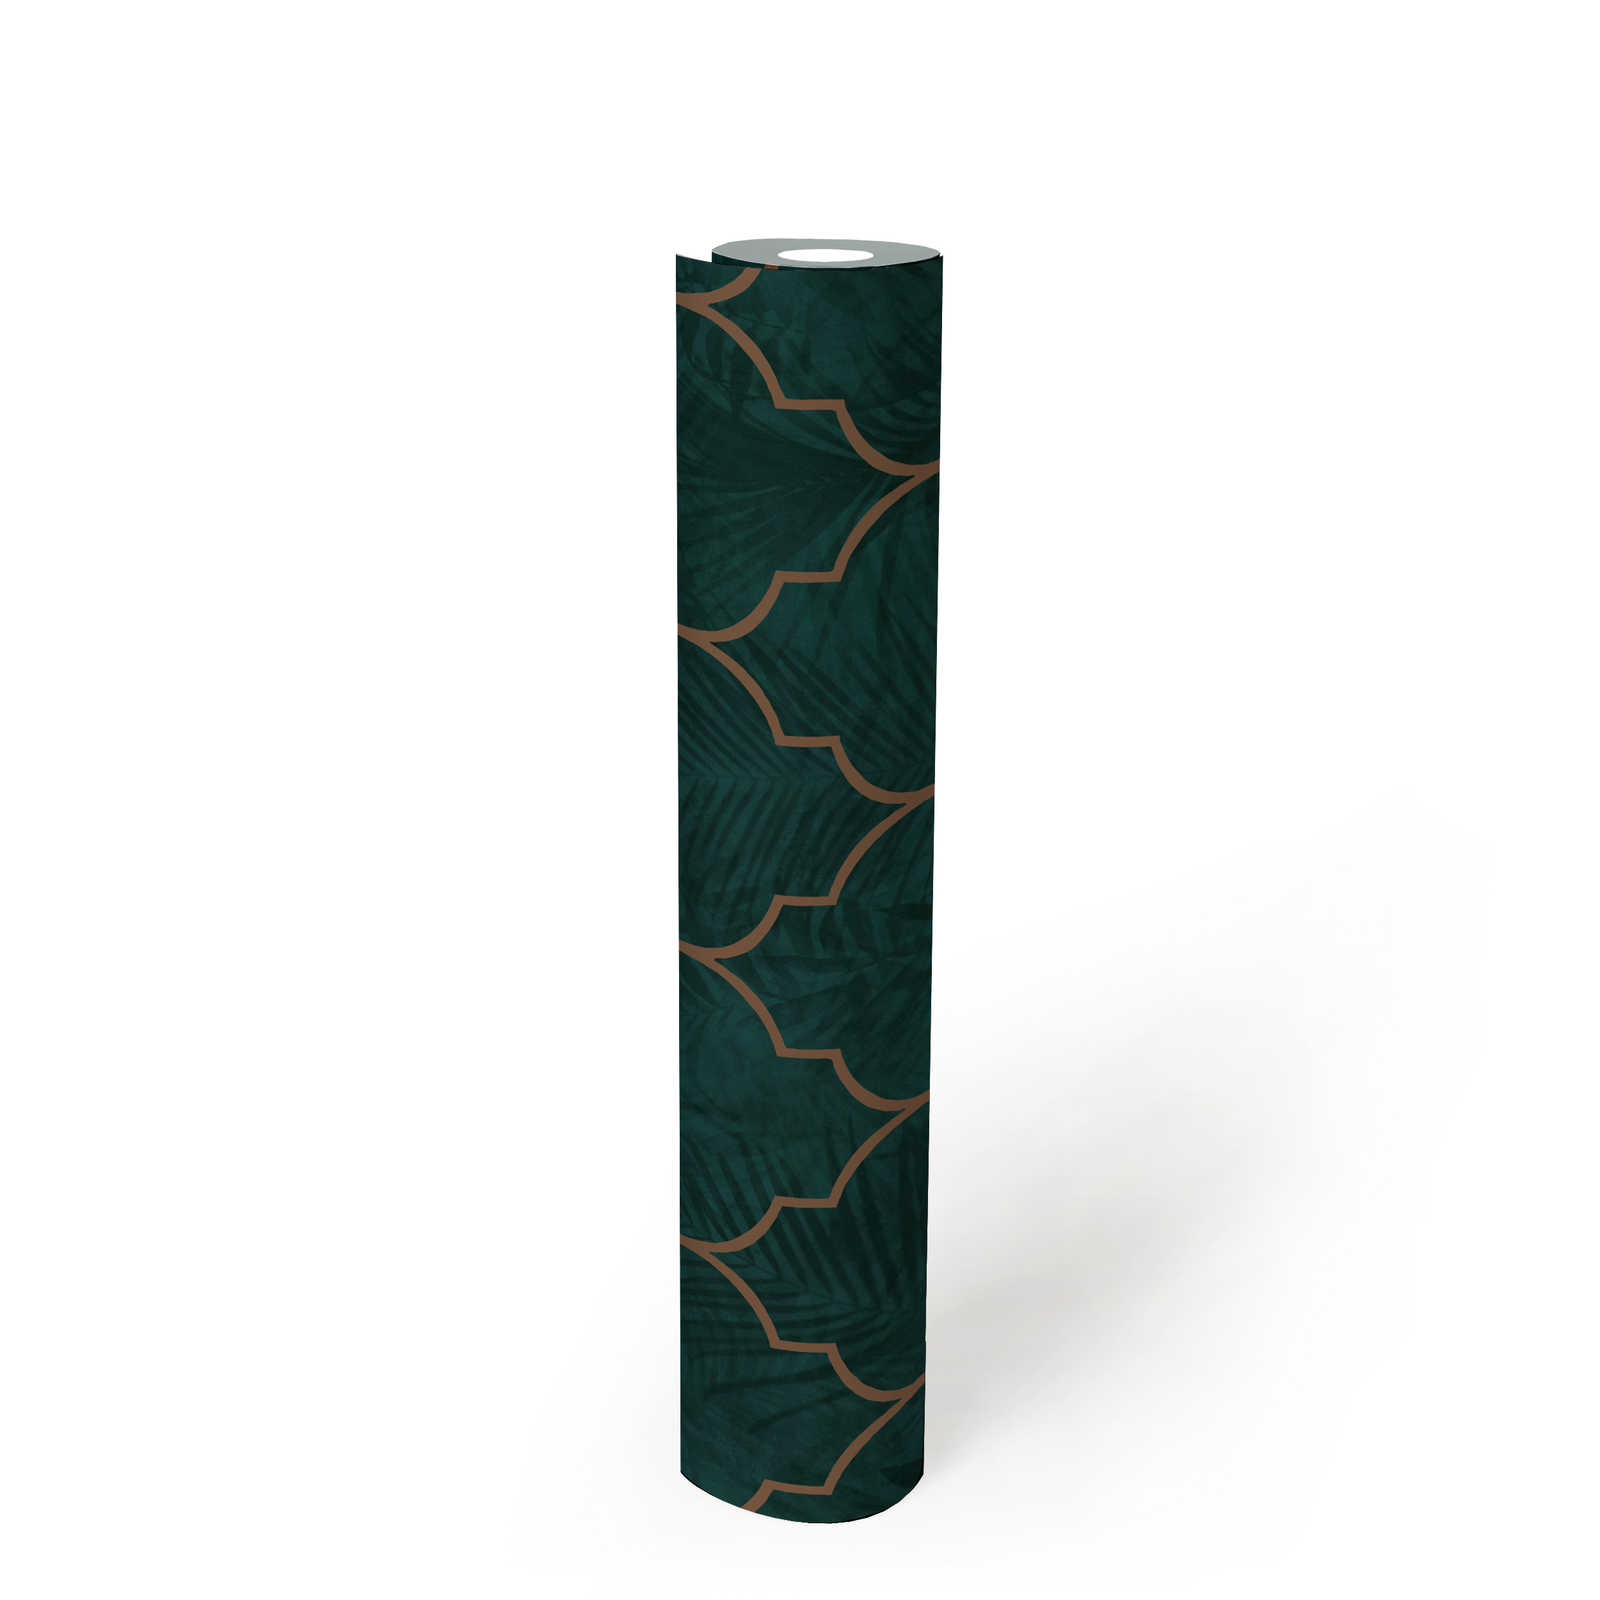             Tile wallpaper with ornament and leaf pattern - green, turquoise, brown
        